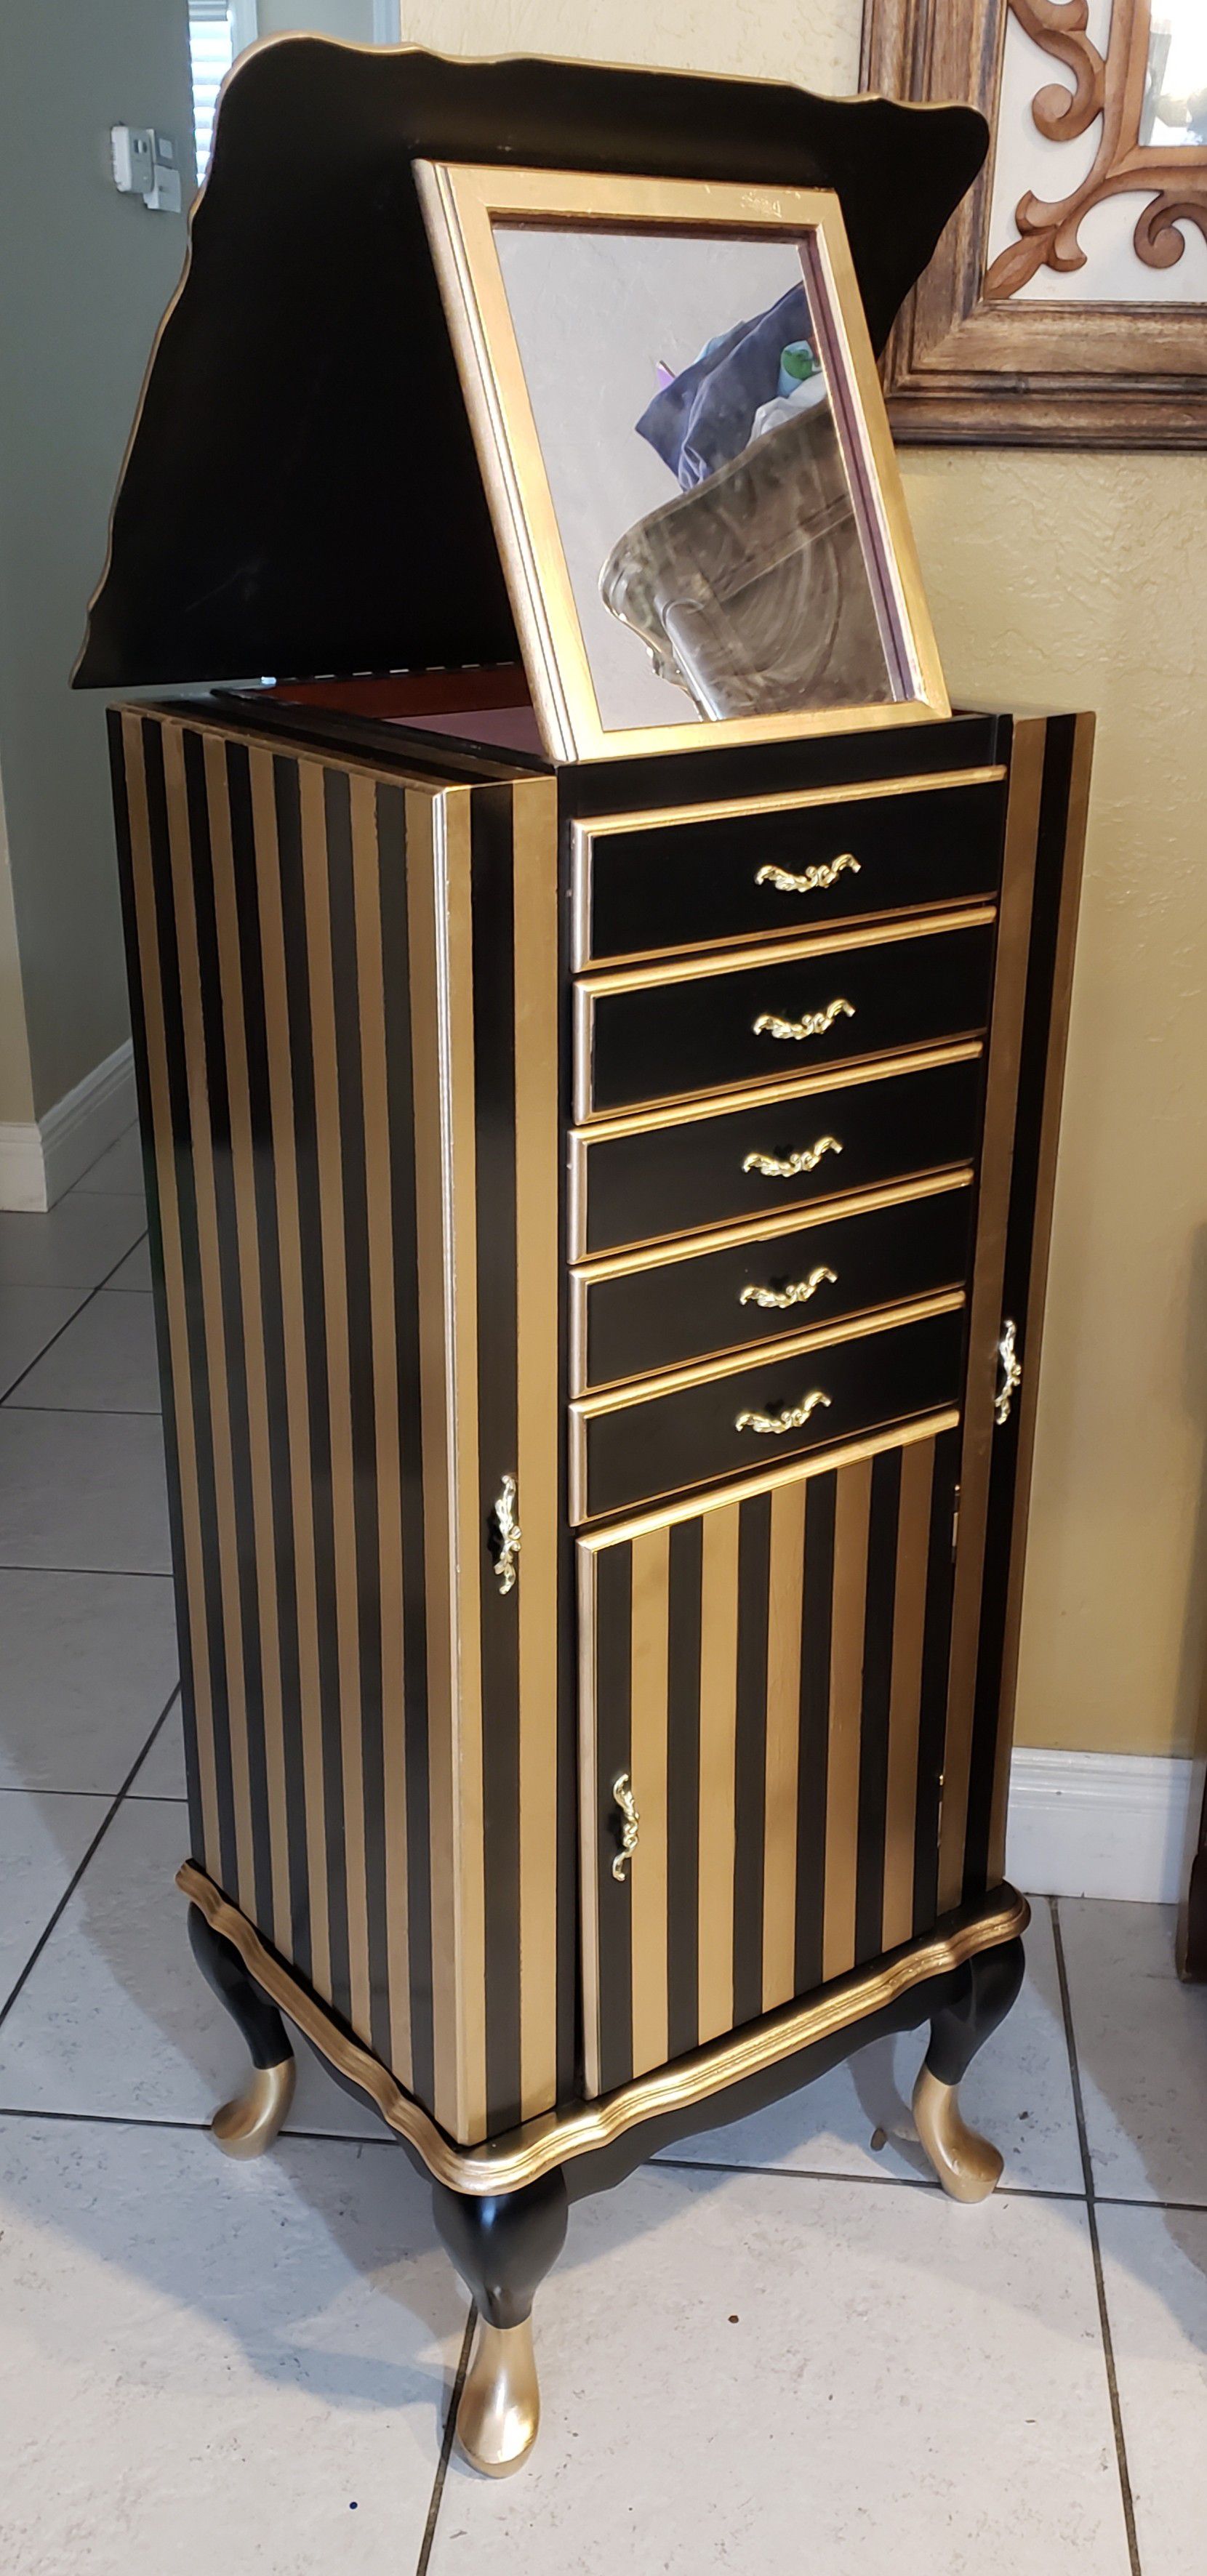 This Black and Gold beauty, Jewerly armoire!